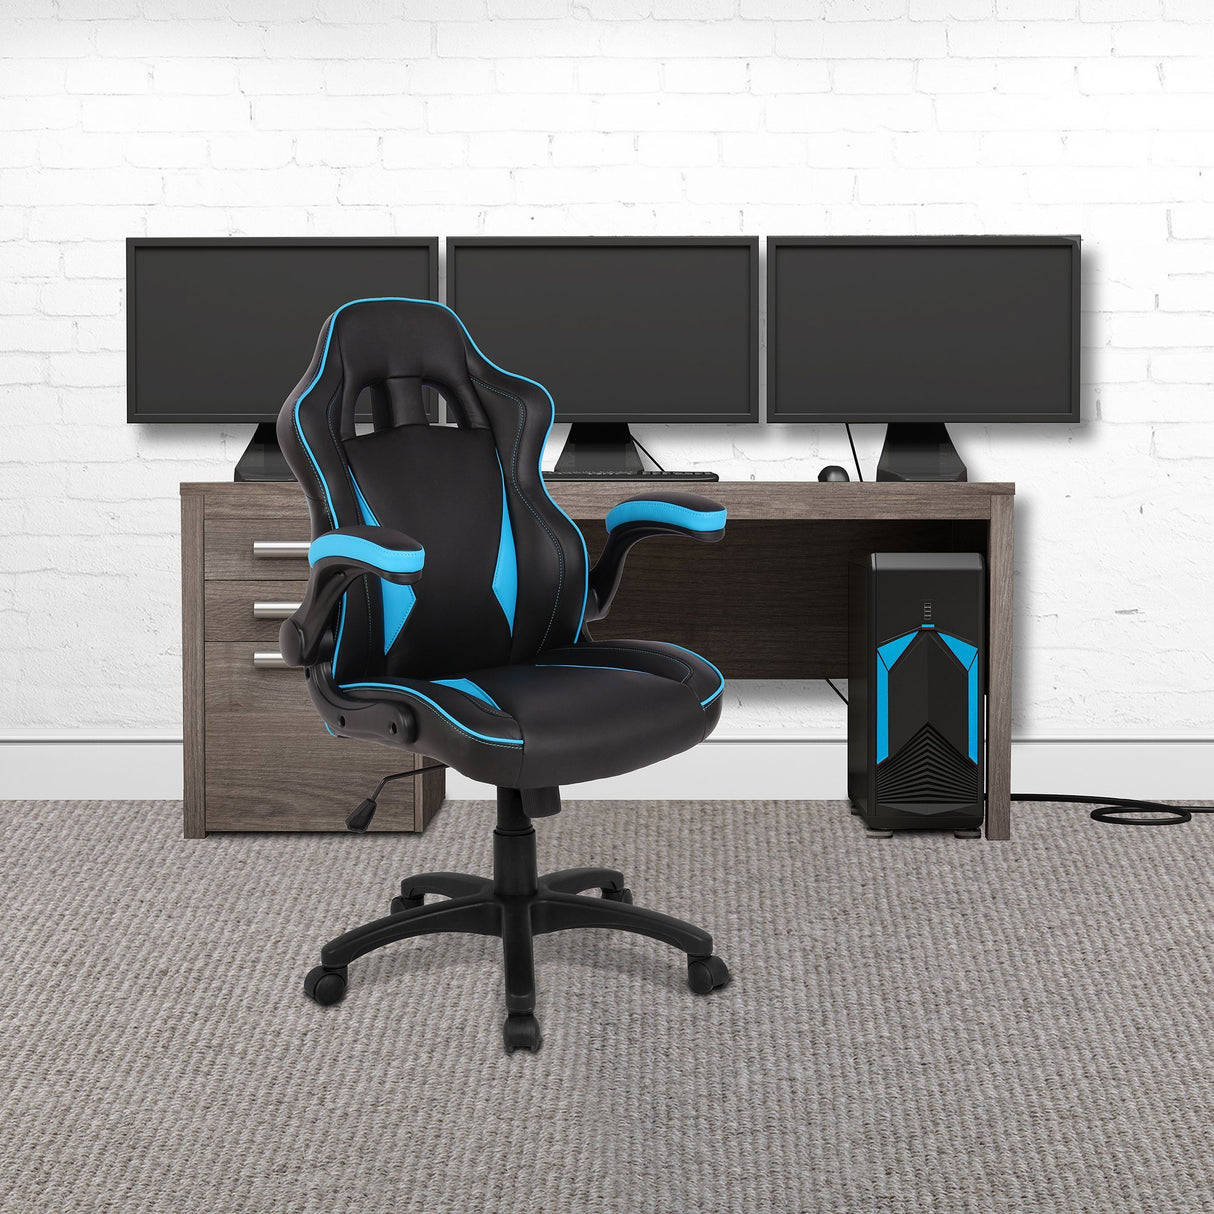 Nautilus Designs Predator  Executive Ergonomic Gaming Style Office Chair with Folding Arms, Integral Headrest and Lumbar Support - Black/Blue